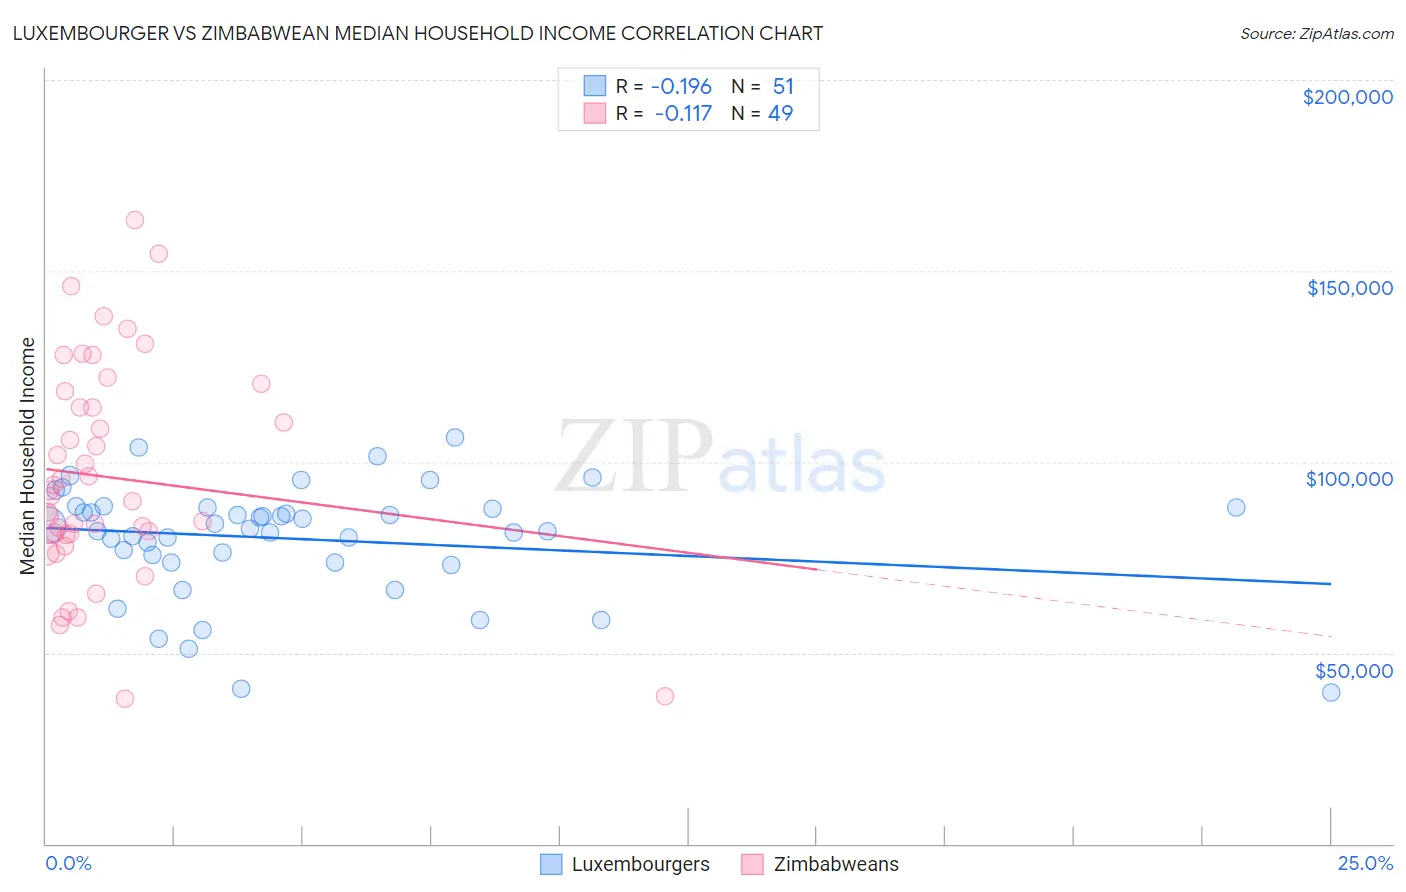 Luxembourger vs Zimbabwean Median Household Income